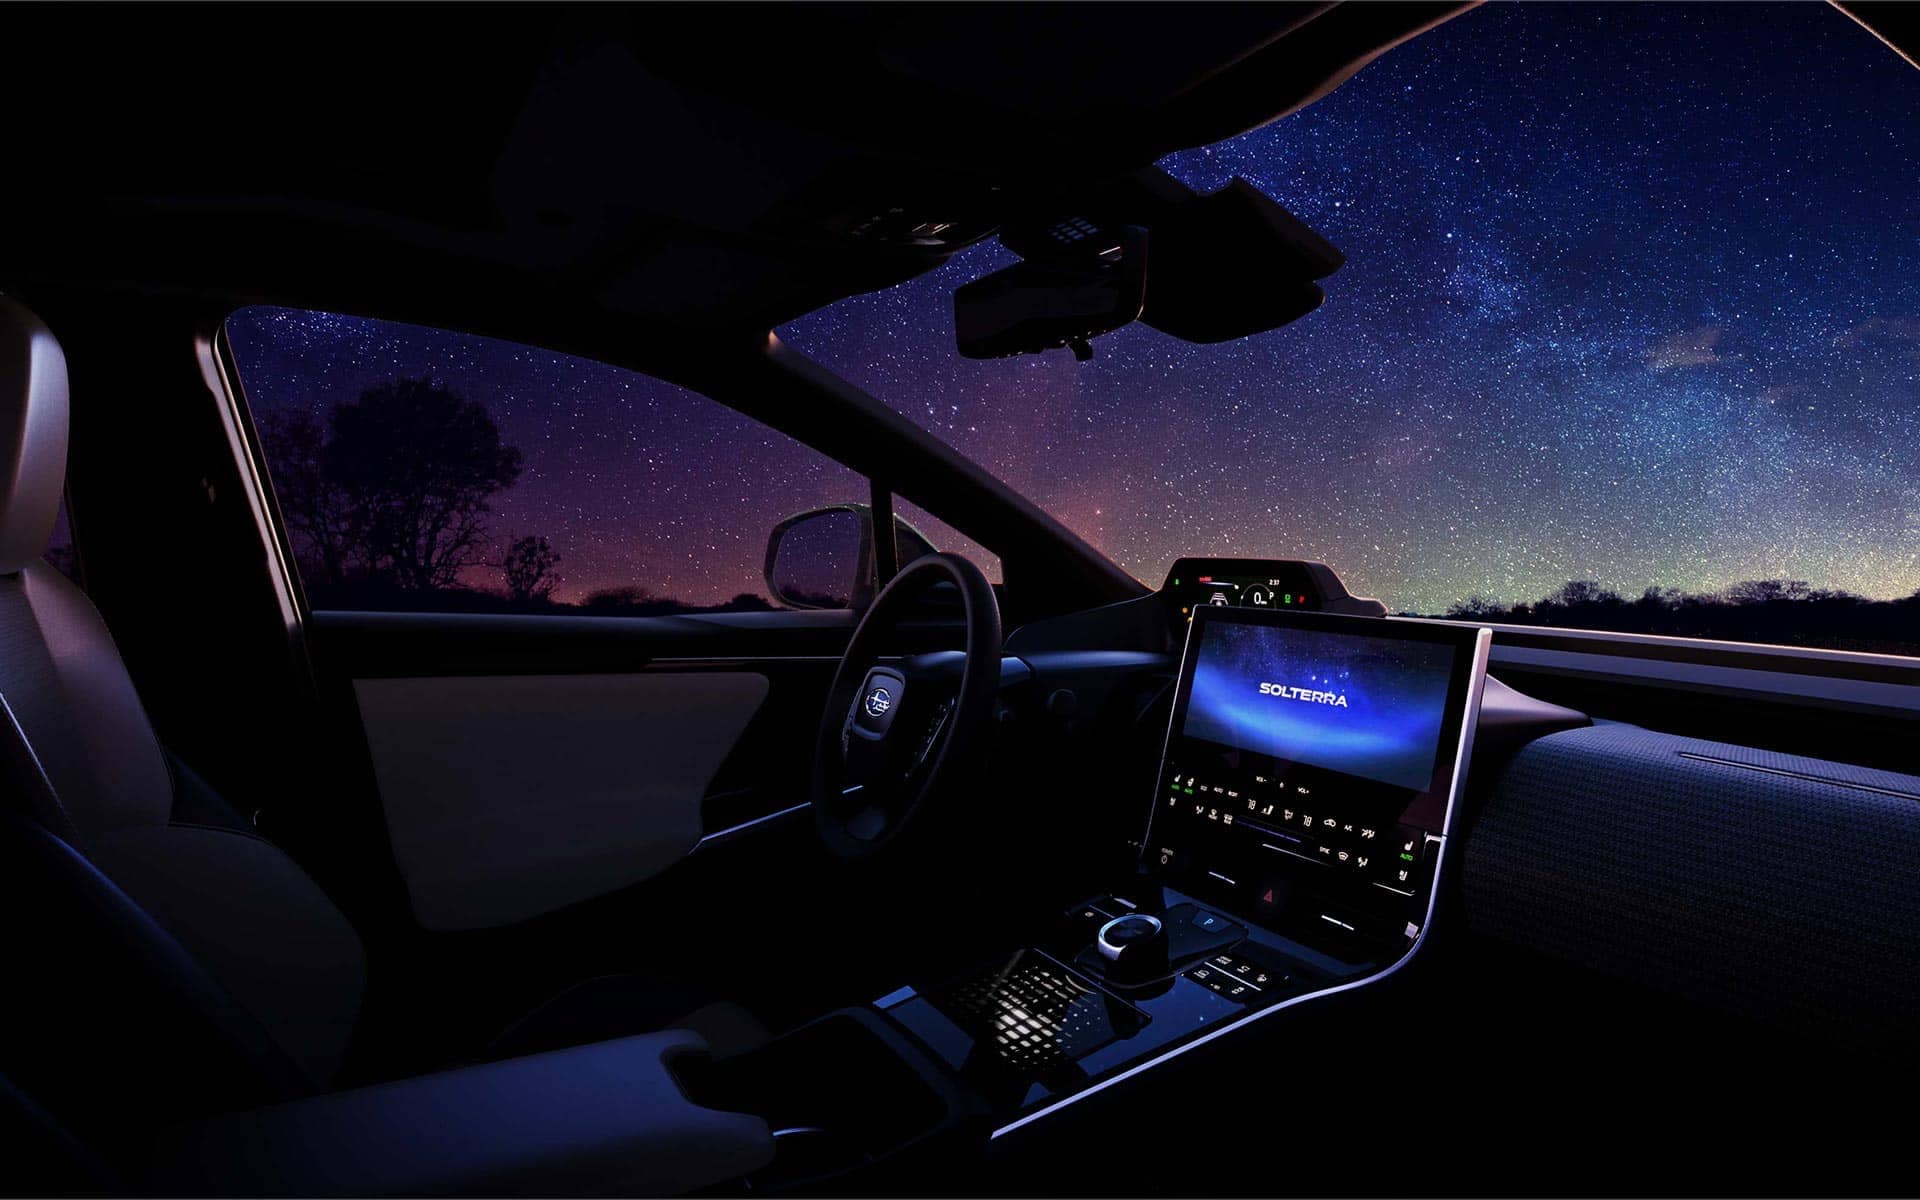 View from the inside a subaru at night